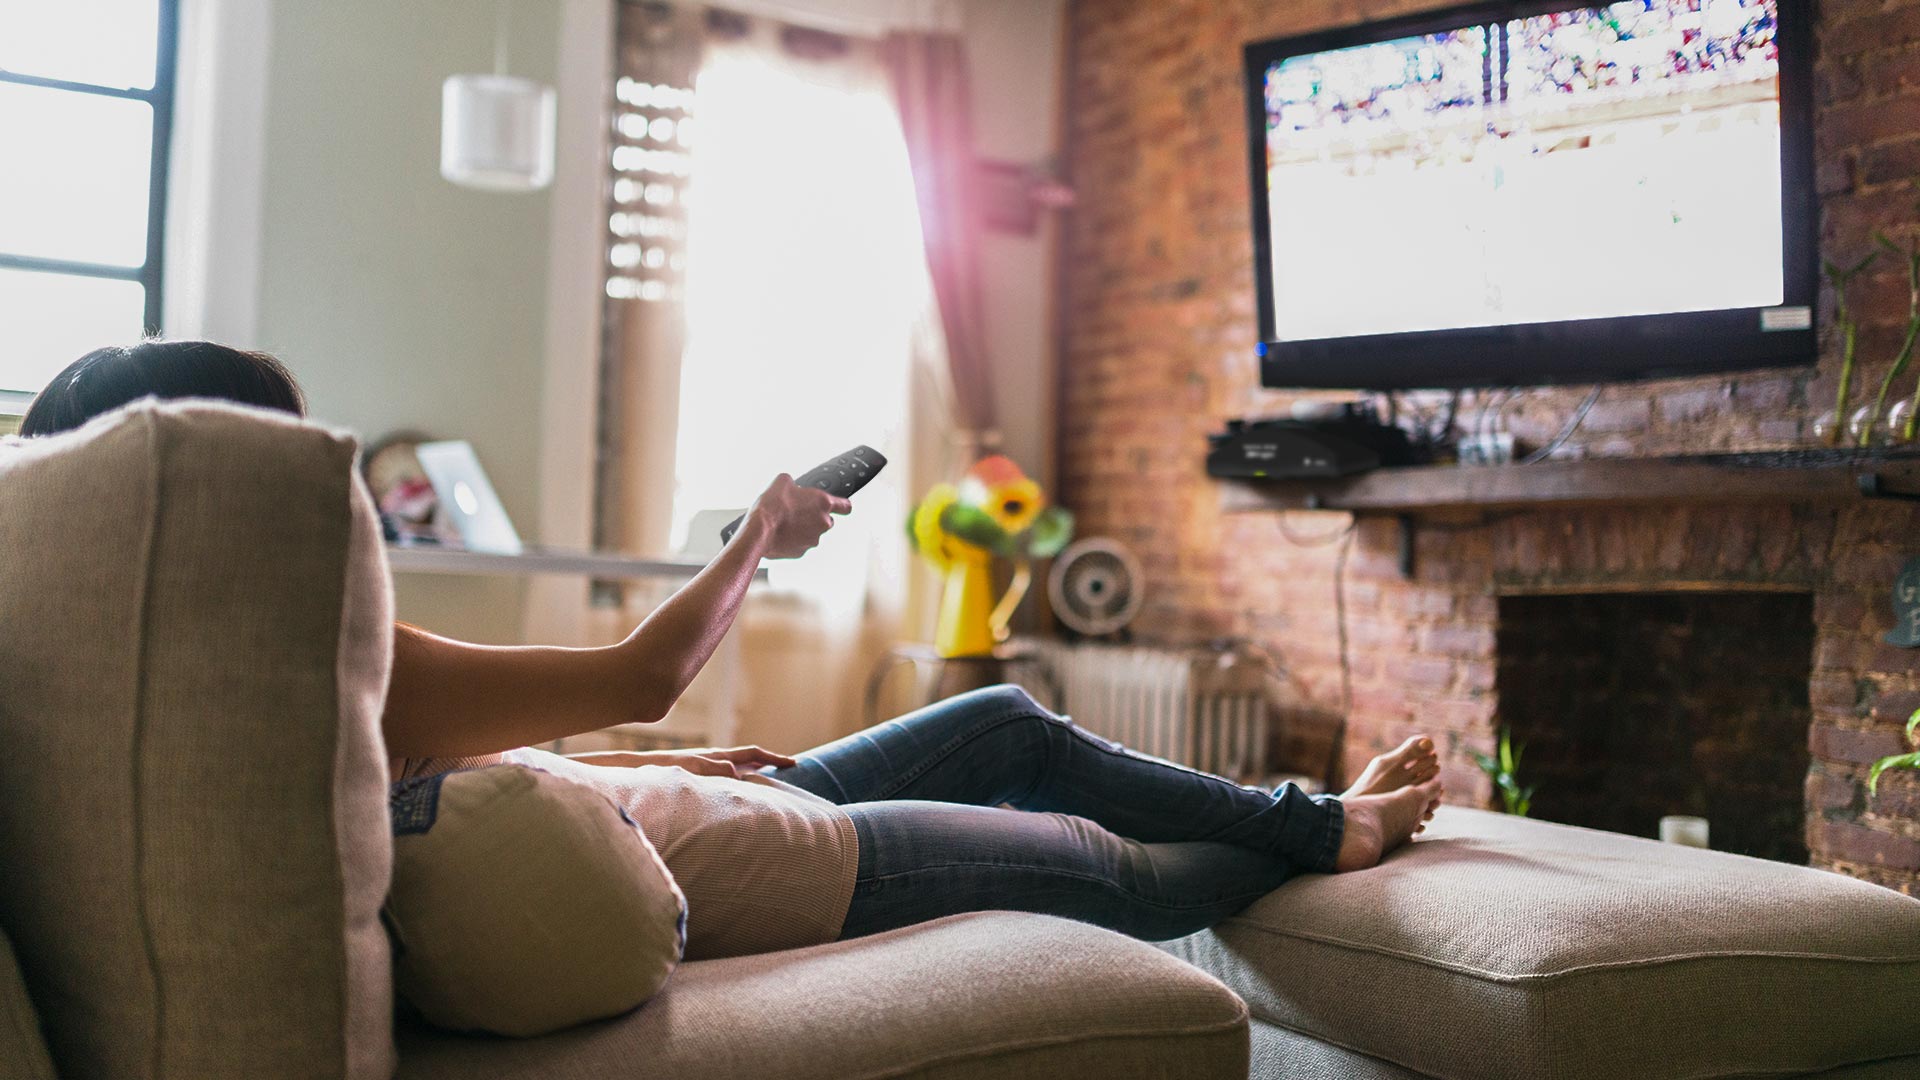 Watching: The Benefits and Risks of Binge-Watching